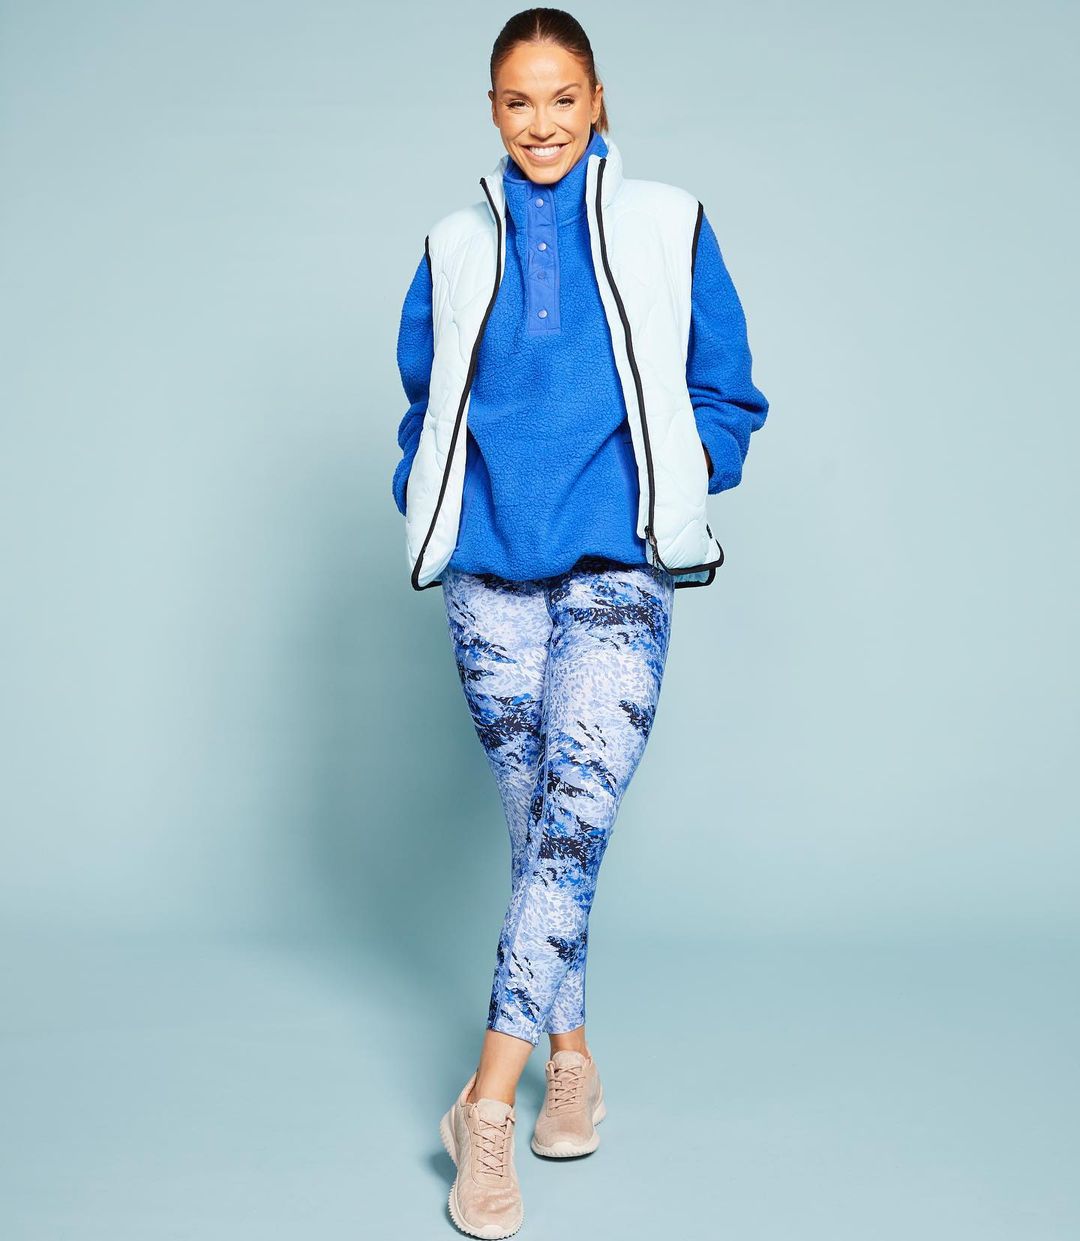 Vicky Pattison Fashion photoshoot in a sky-blue half jacket, ocean blue hoodie, blue and white sweats and skin color sports shoes